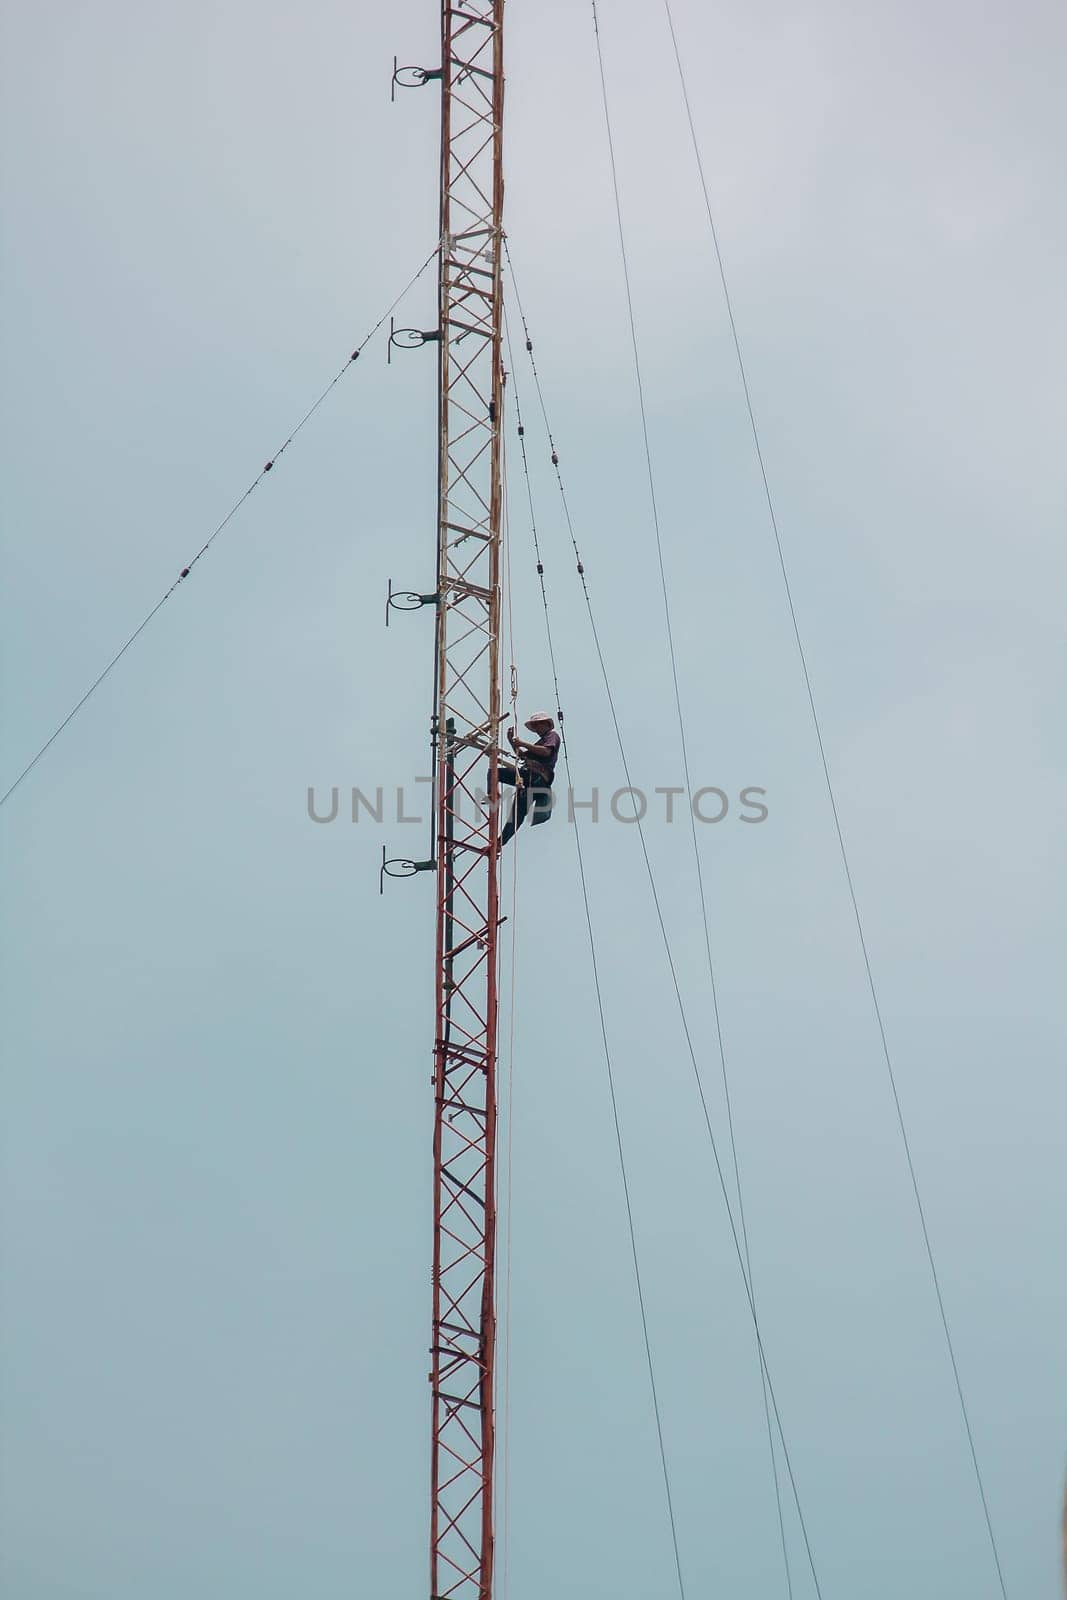 Men are climbing on the antenna. To install the device